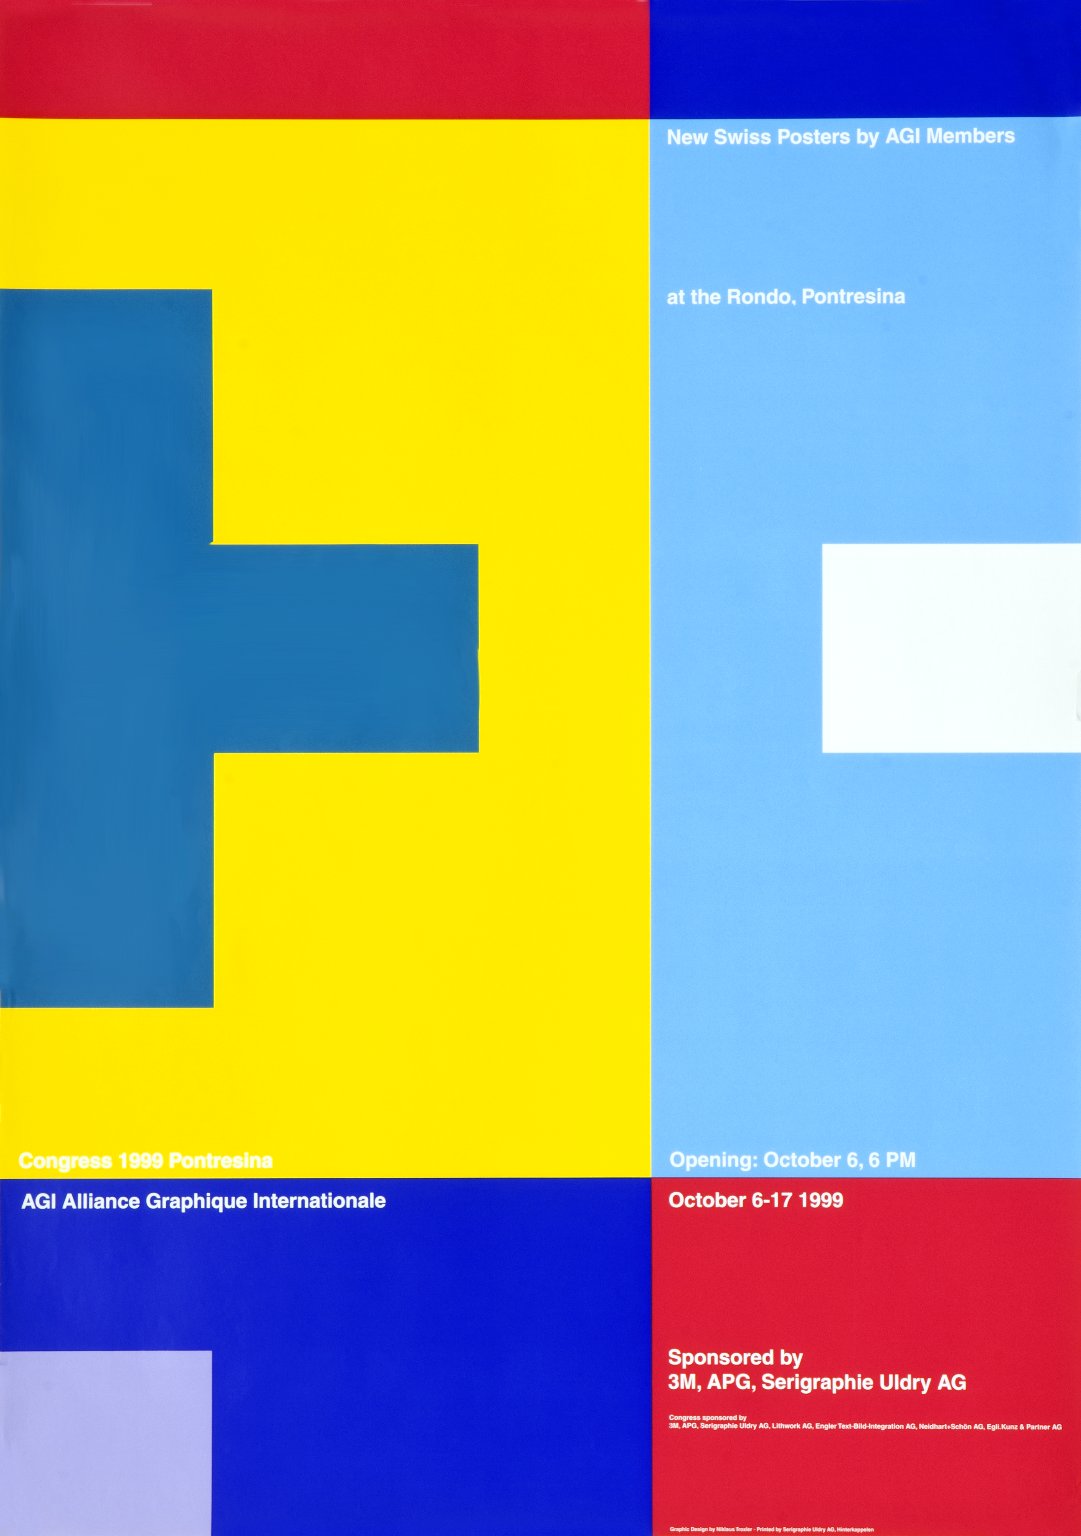 New Swiss Posters by AGI Members